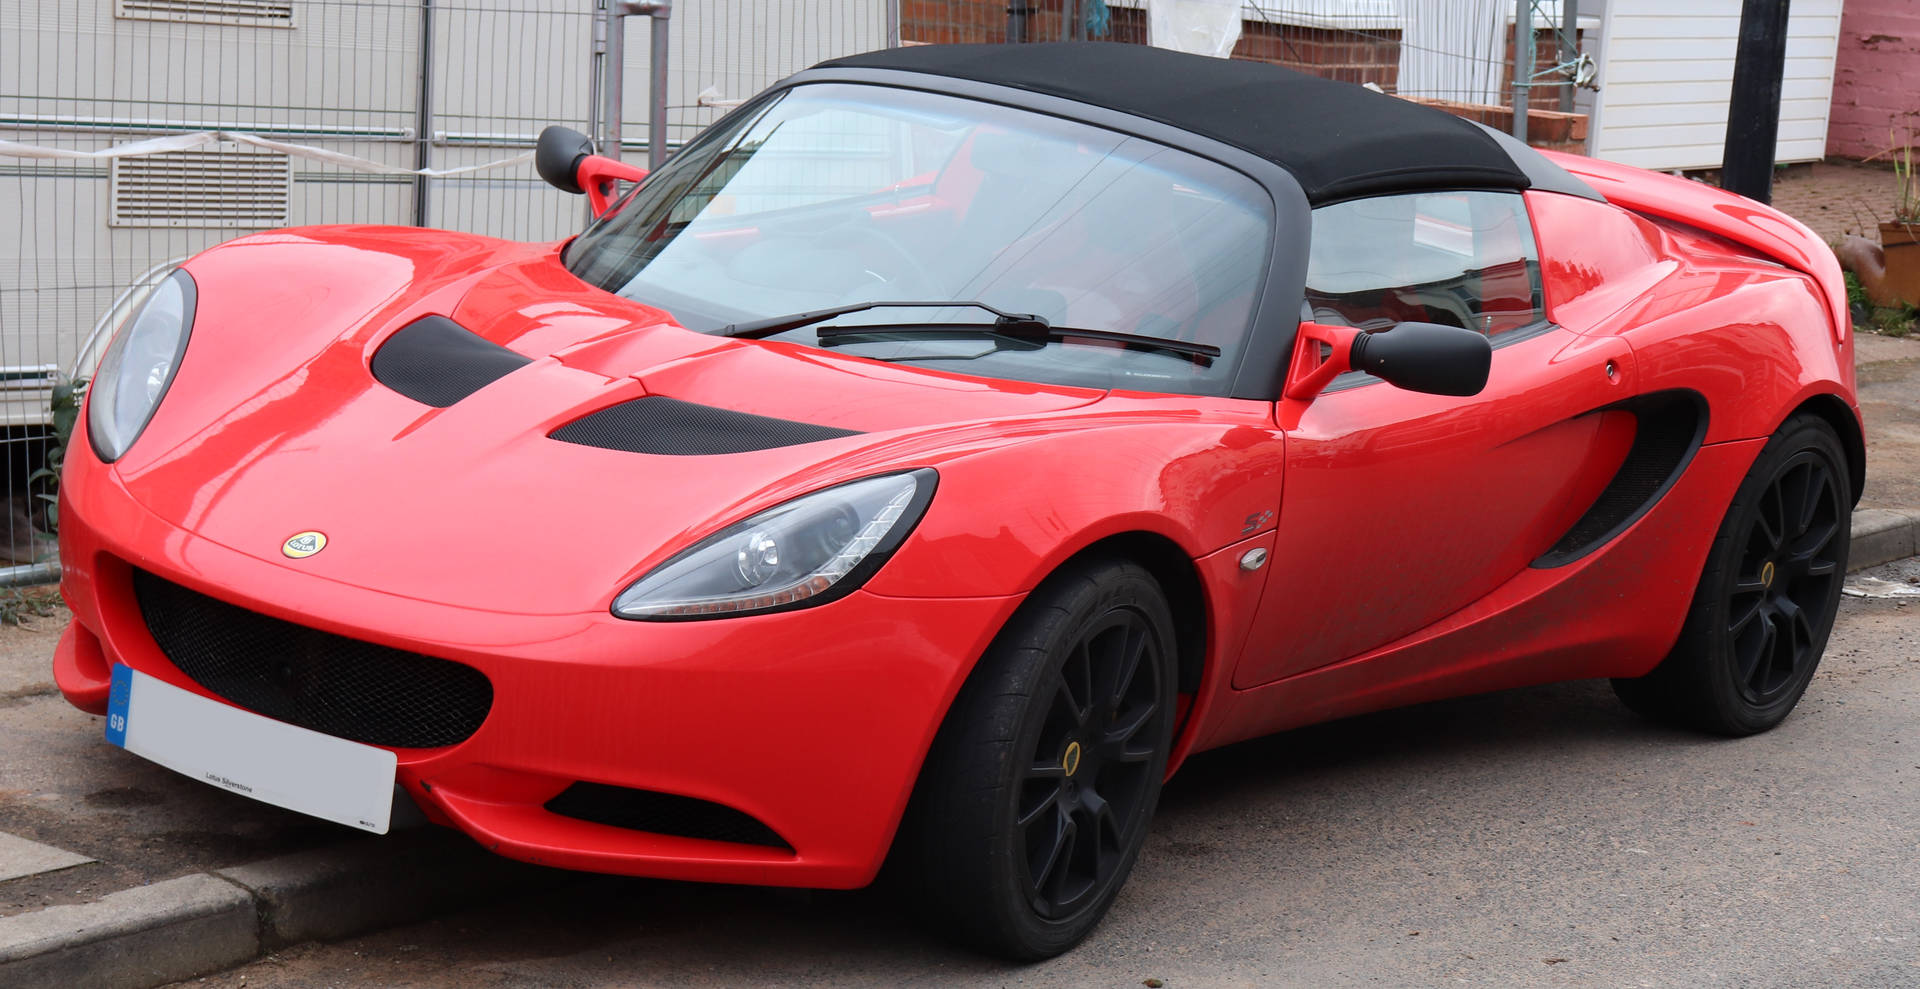 Red Lotus Elise Car Parked On Curb Wallpaper